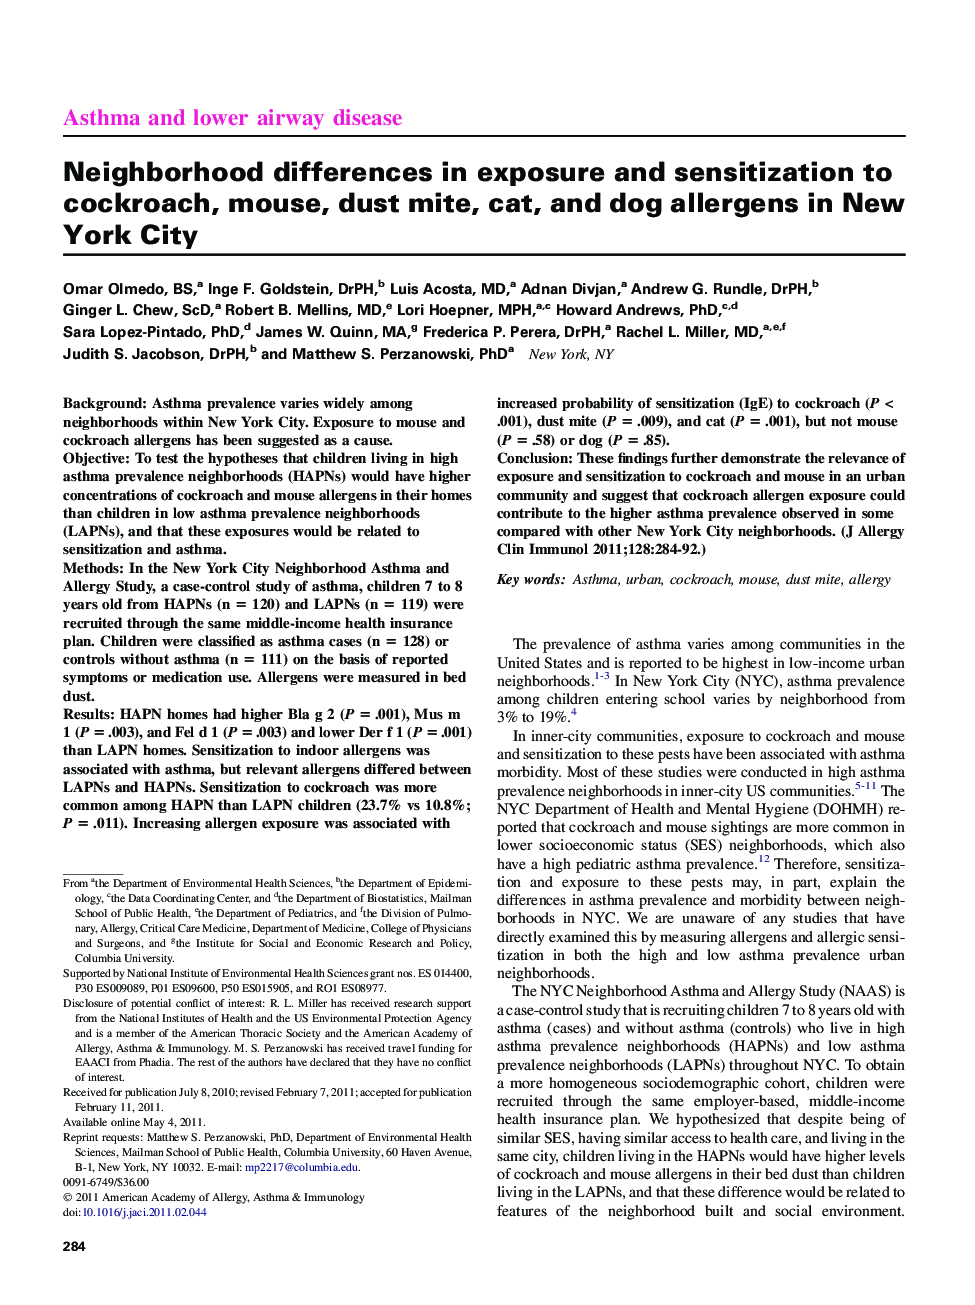 Neighborhood differences in exposure and sensitization to cockroach, mouse, dust mite, cat, and dog allergens in New York City